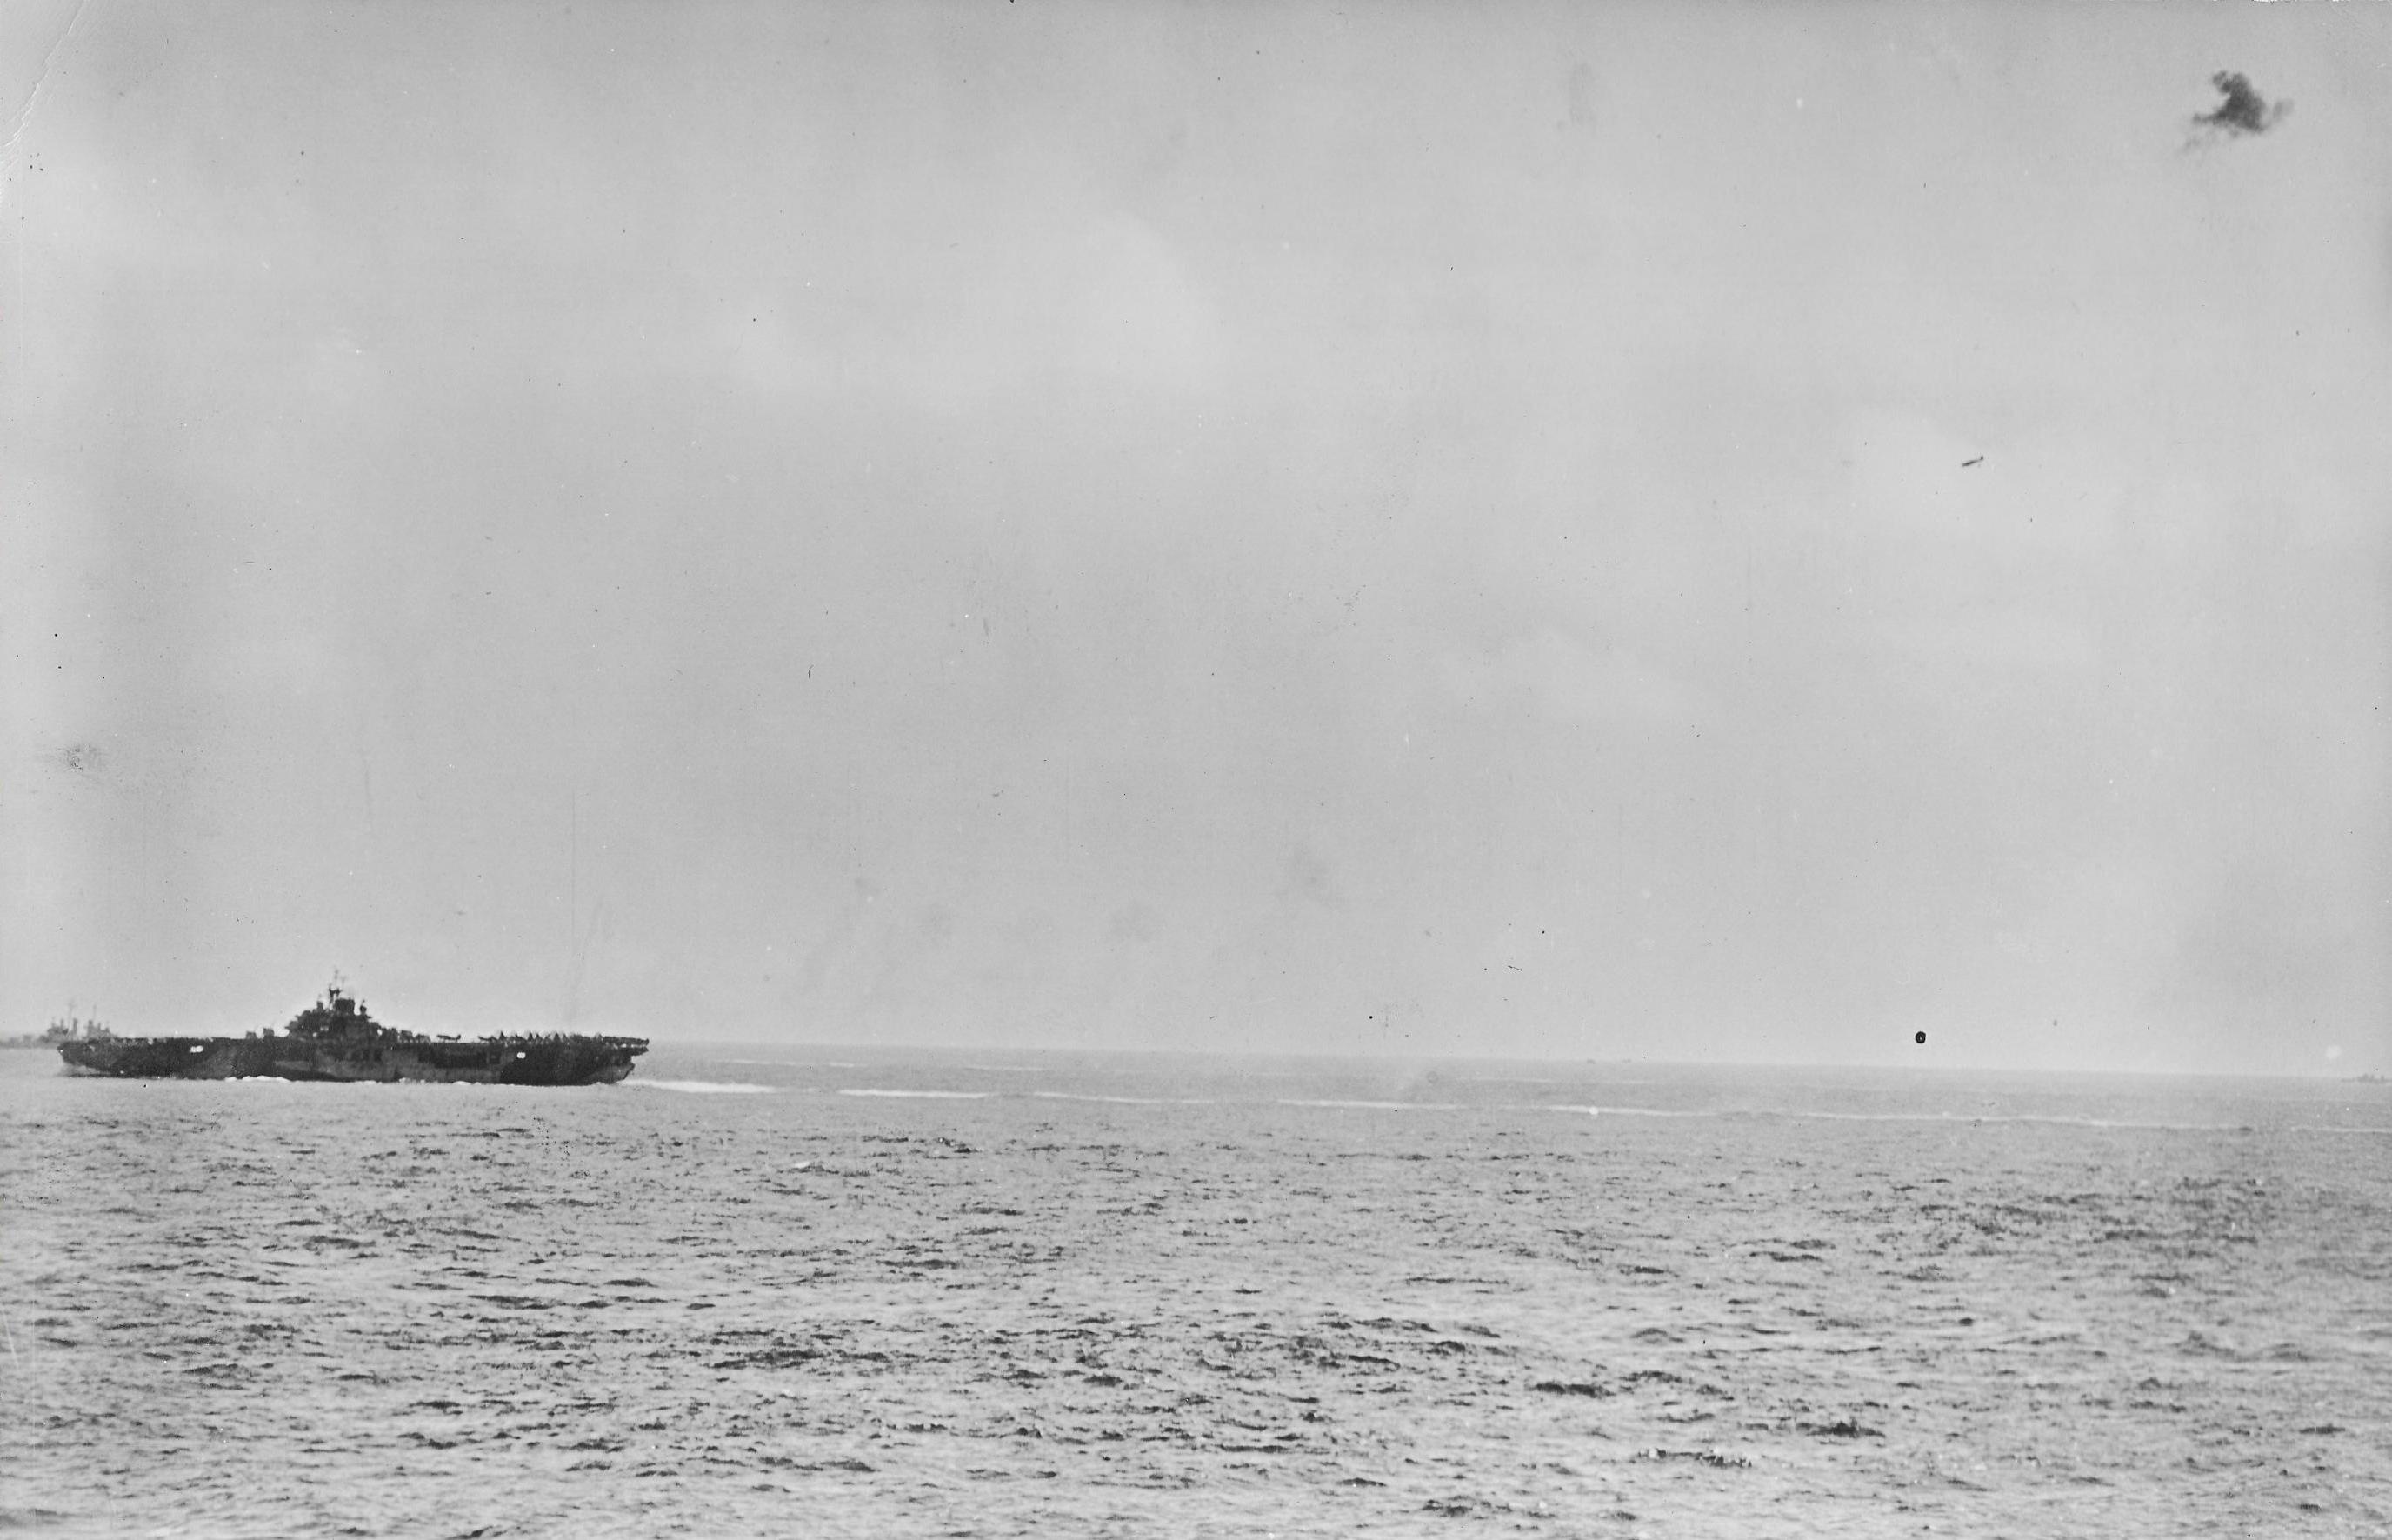 USS Essex struck by Lt. Yoshinori Yamaguchi's special attack D4Y3 Model 33 aircraft, at 1256 hours on 25 Nov 1944, photo 01 of 10